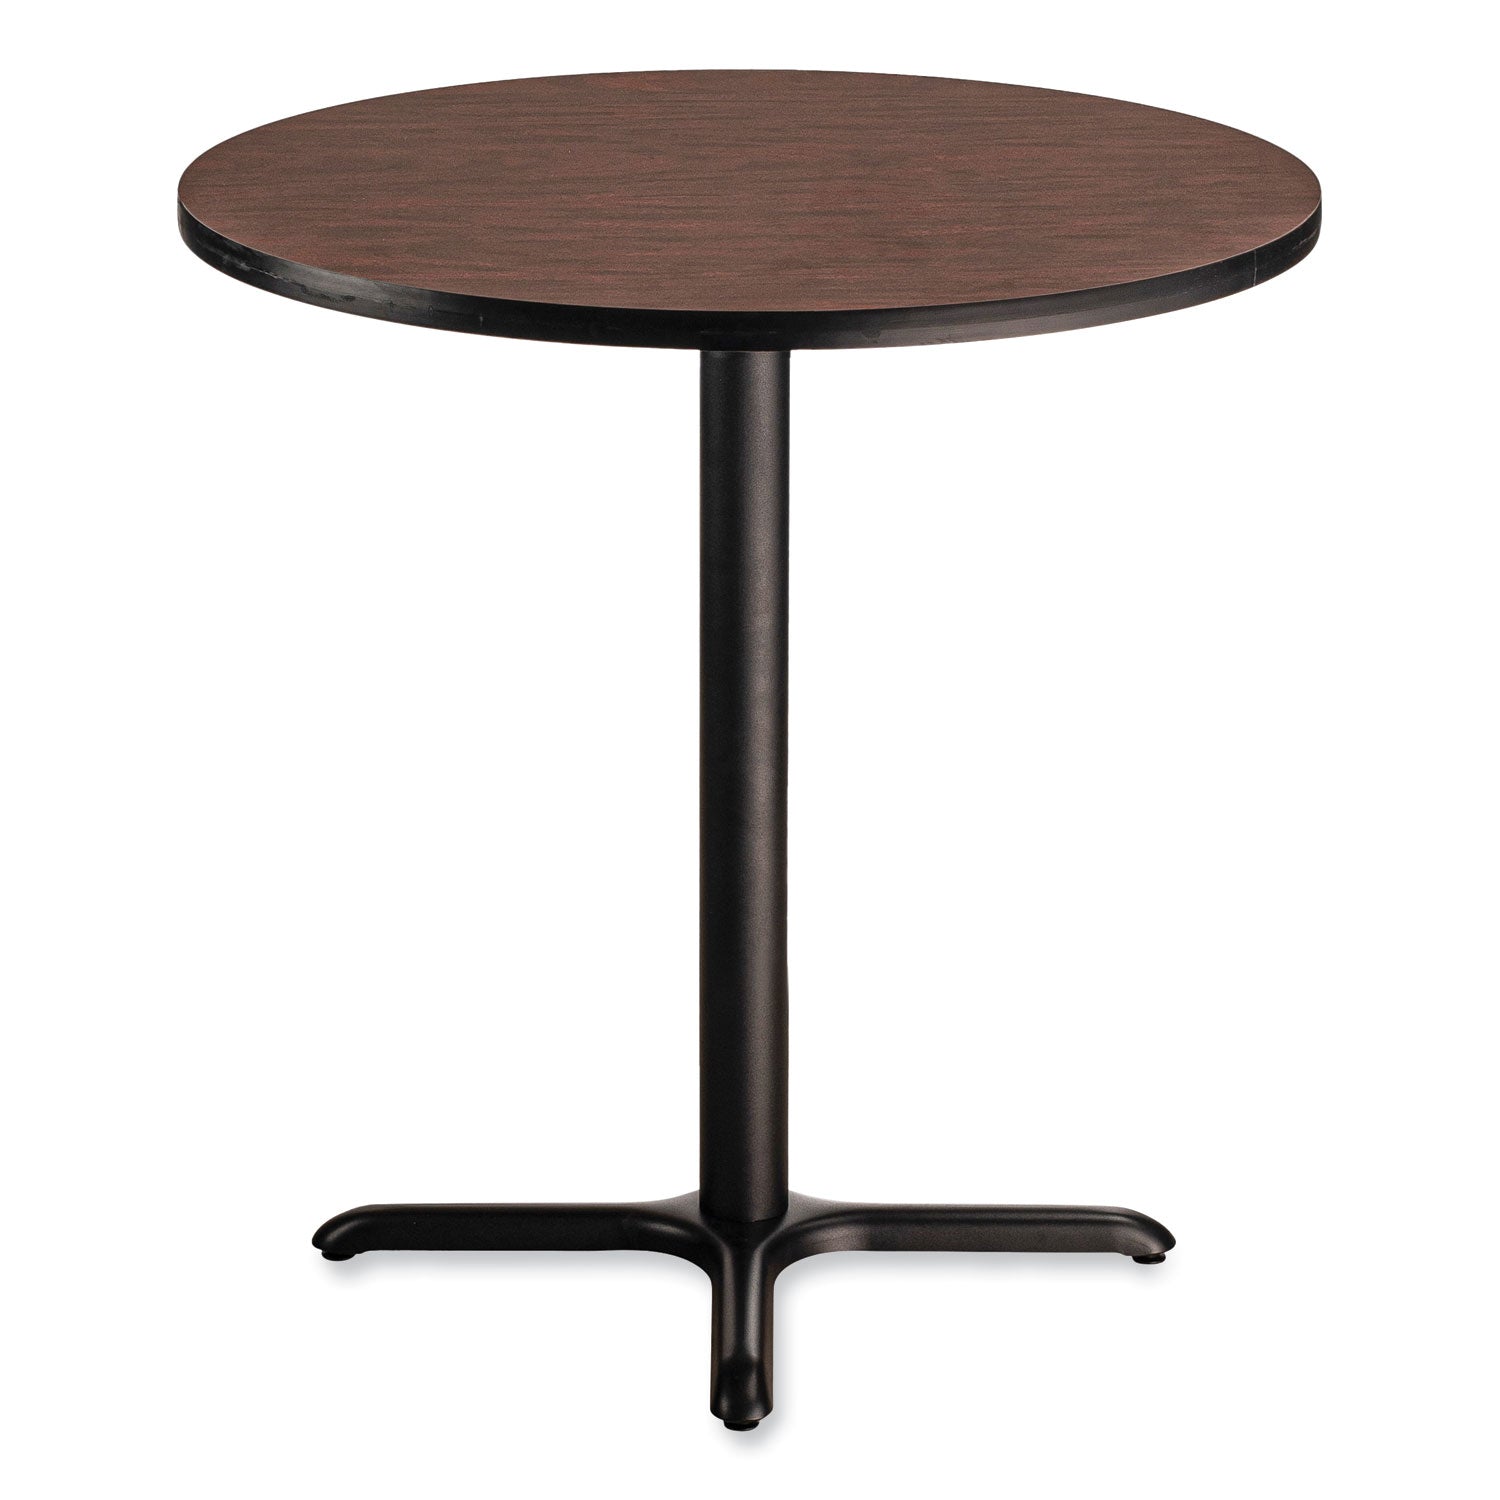 cafe-table-36-diameter-x-36h-round-top-x-base-mahogany-top-black-base-ships-in-7-10-business-days_npsct13636xc1my - 2